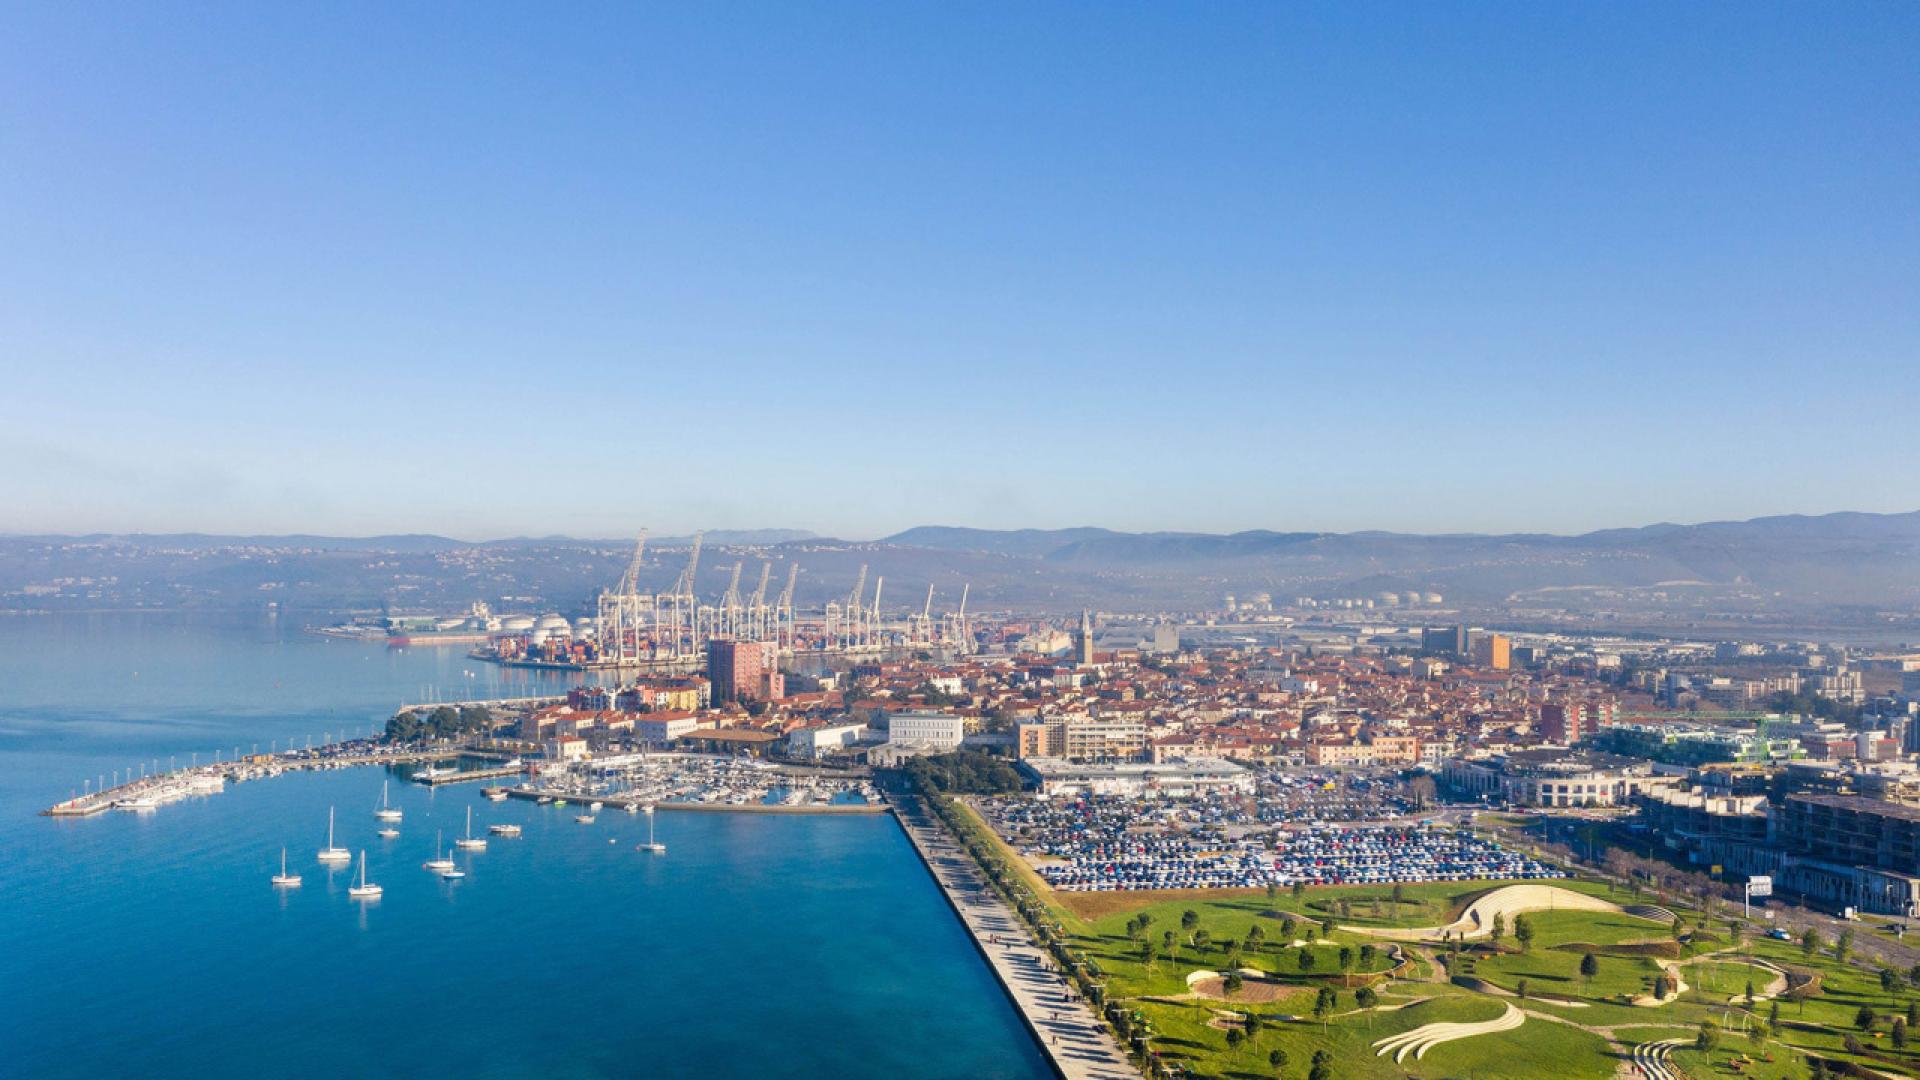 Today’s view on the historical city centre: a new city’s park, parking facilities, an unfinished Solis on the right and the port behind. | Photo © Enota